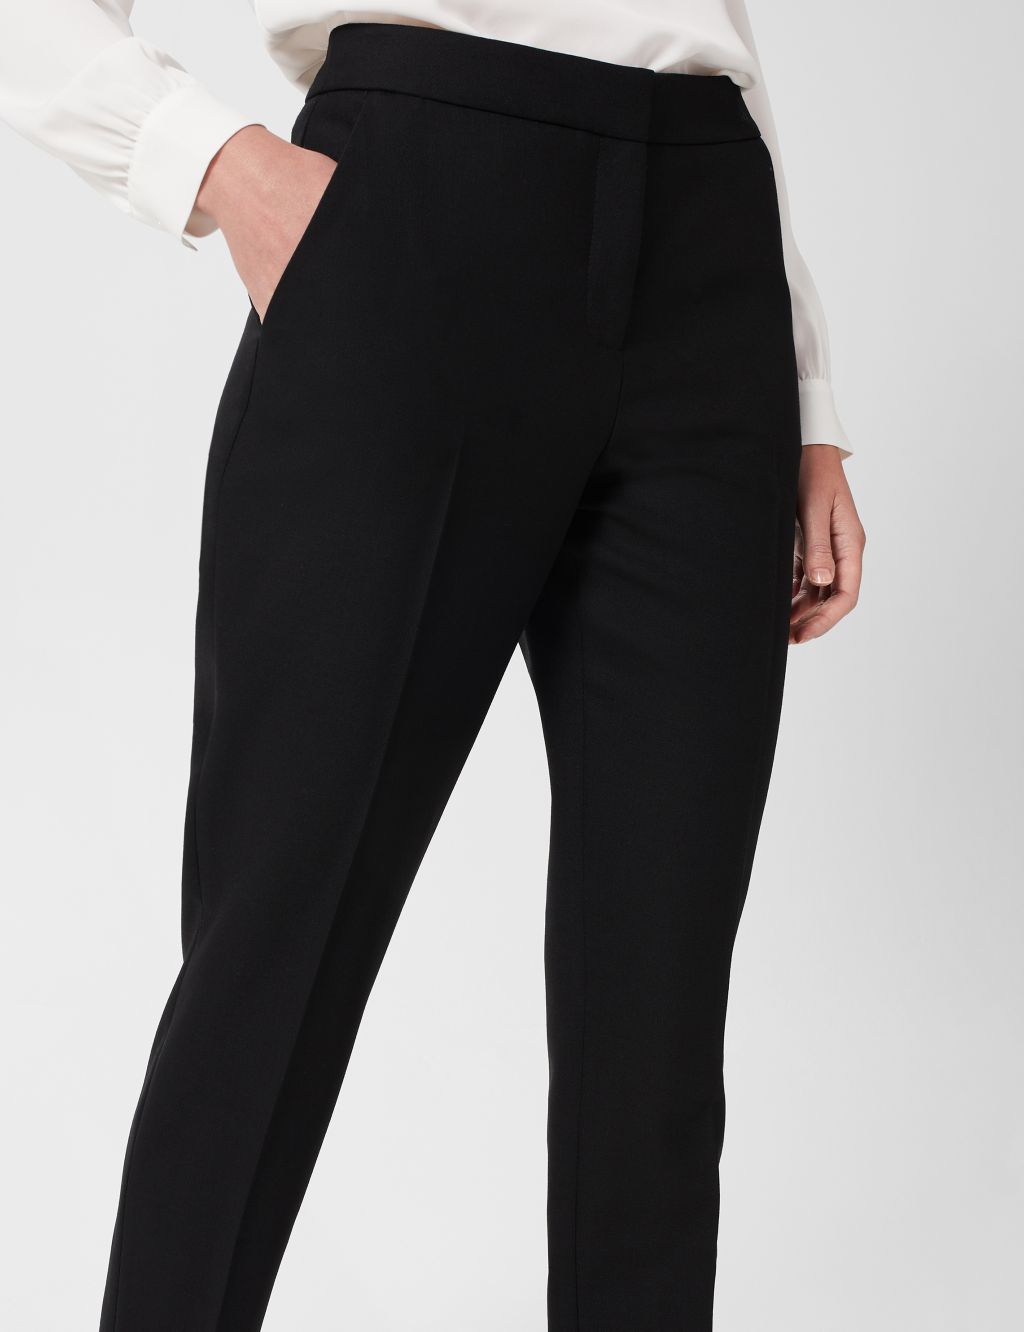 Wool Blend Tapered Trousers image 3